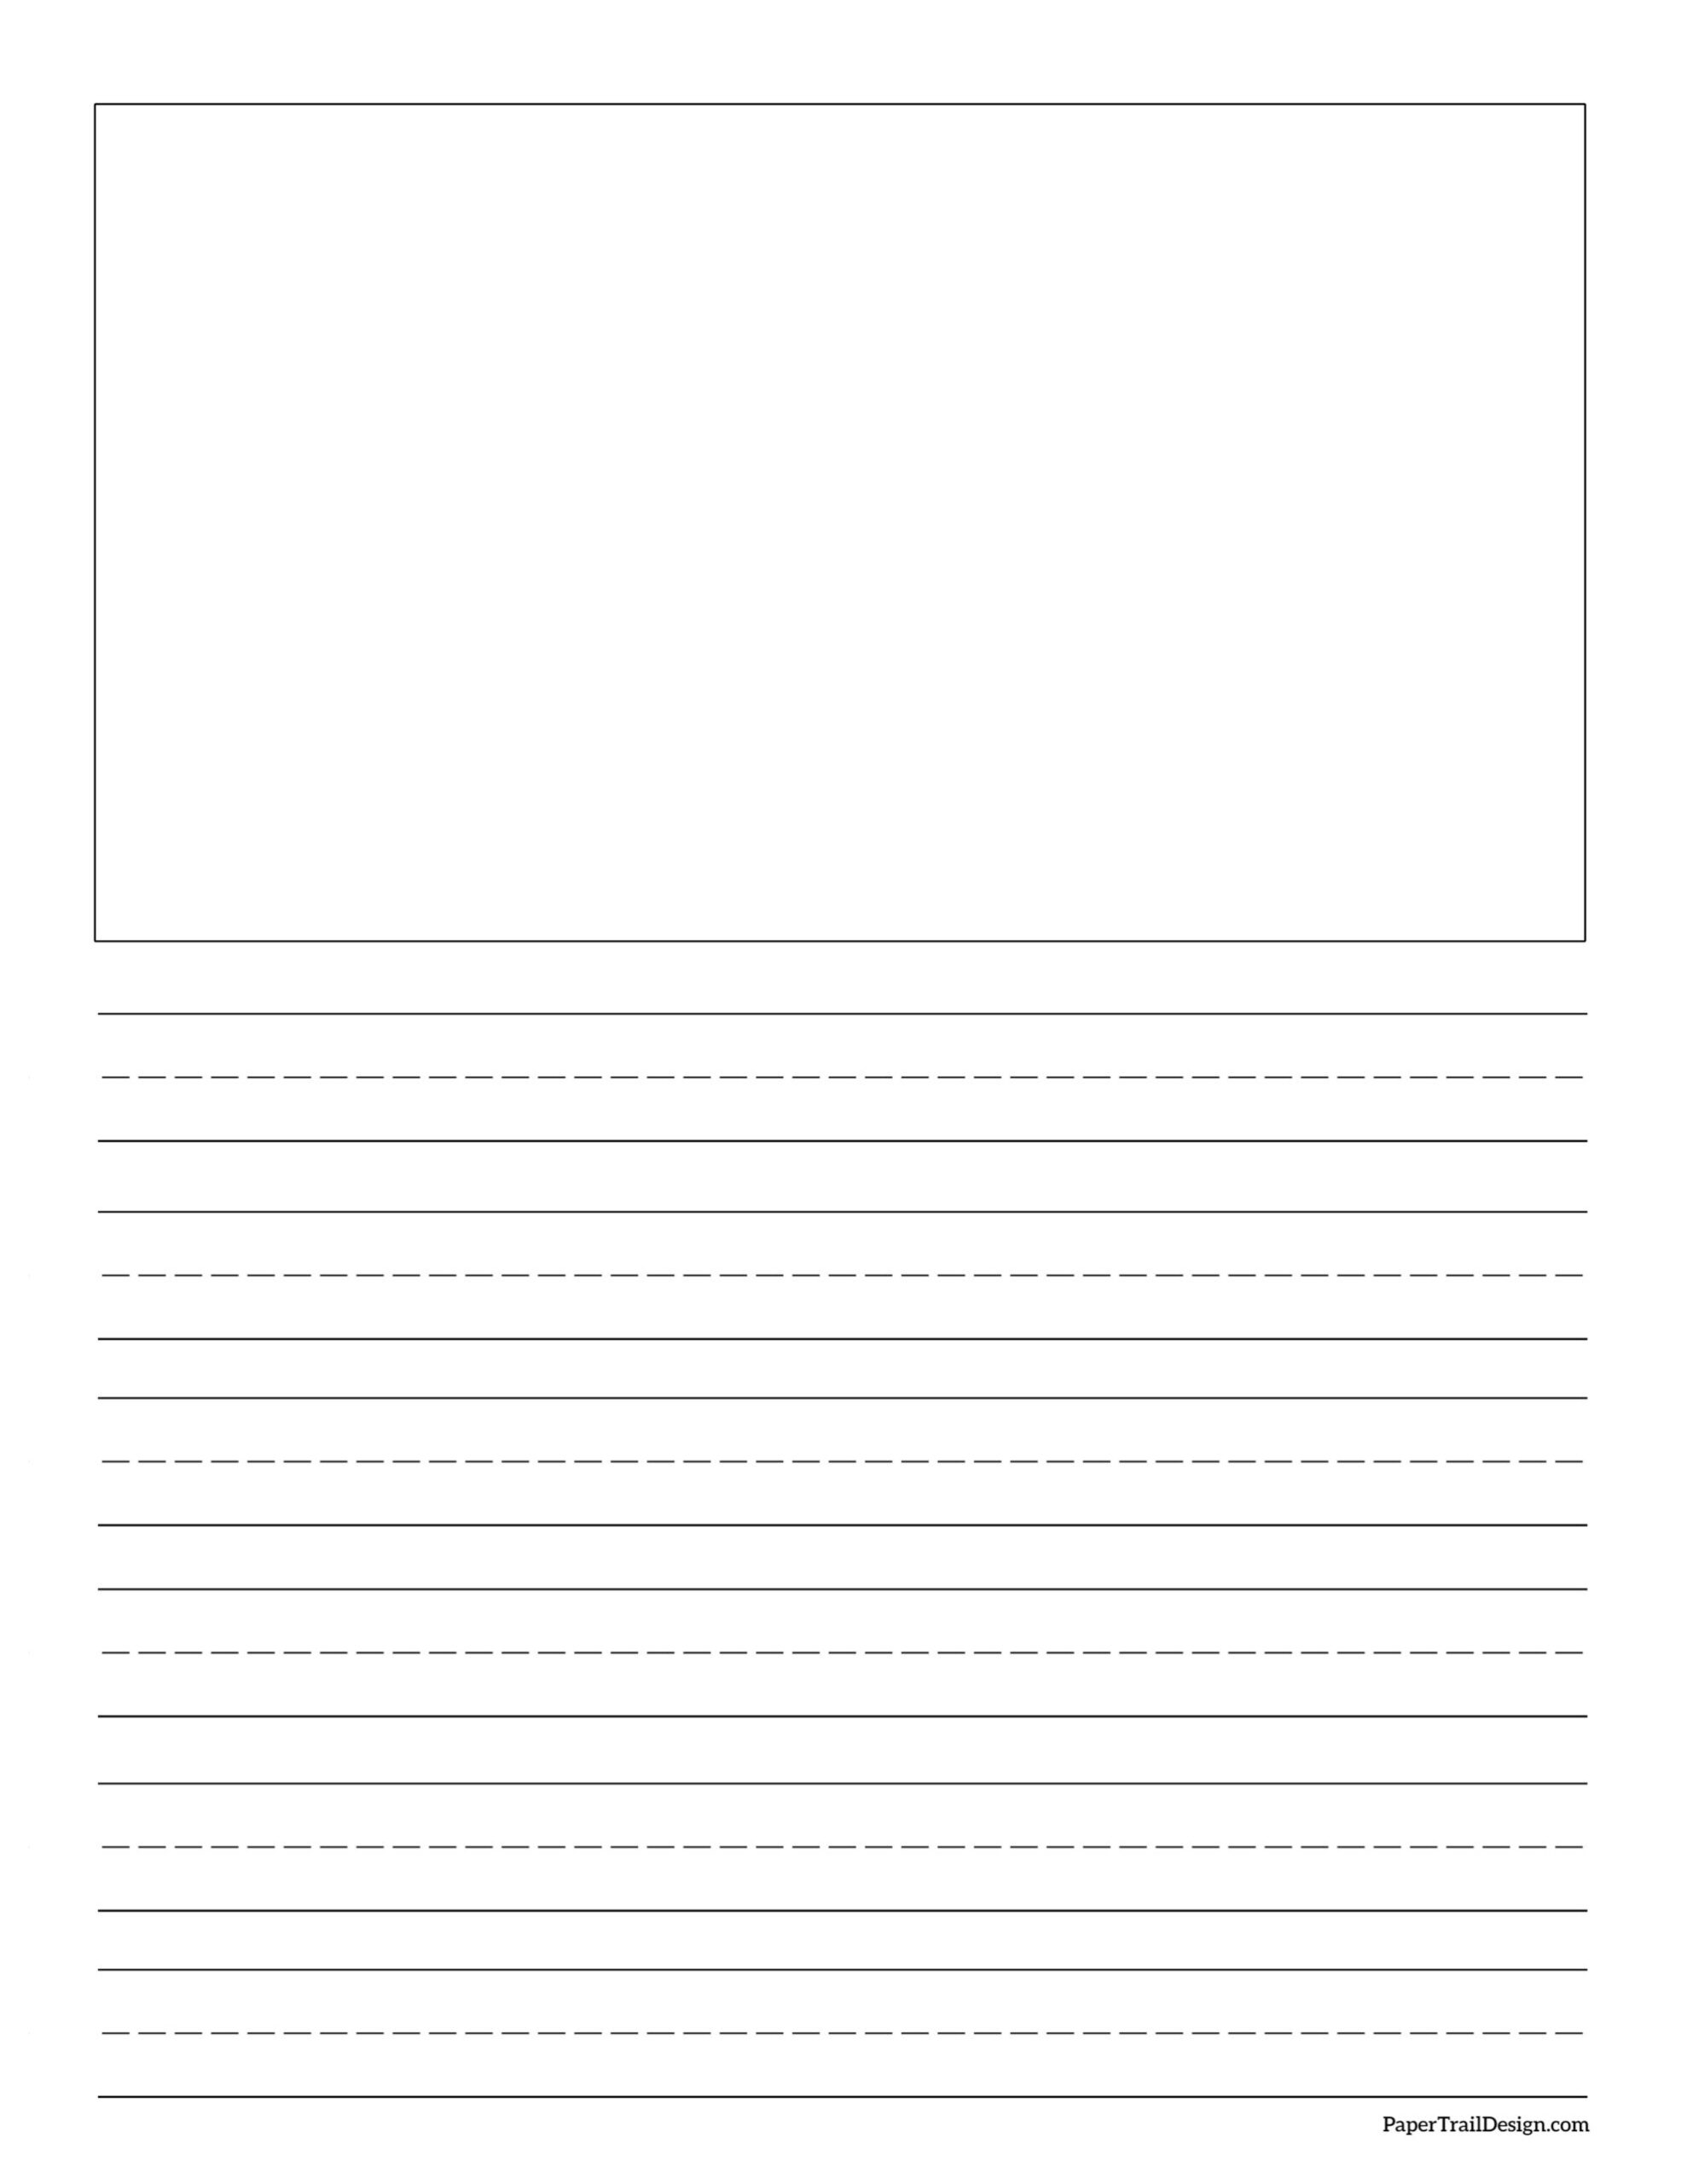 Writing Paper With Picture Space Printable Lined Paper PRINT FREE 